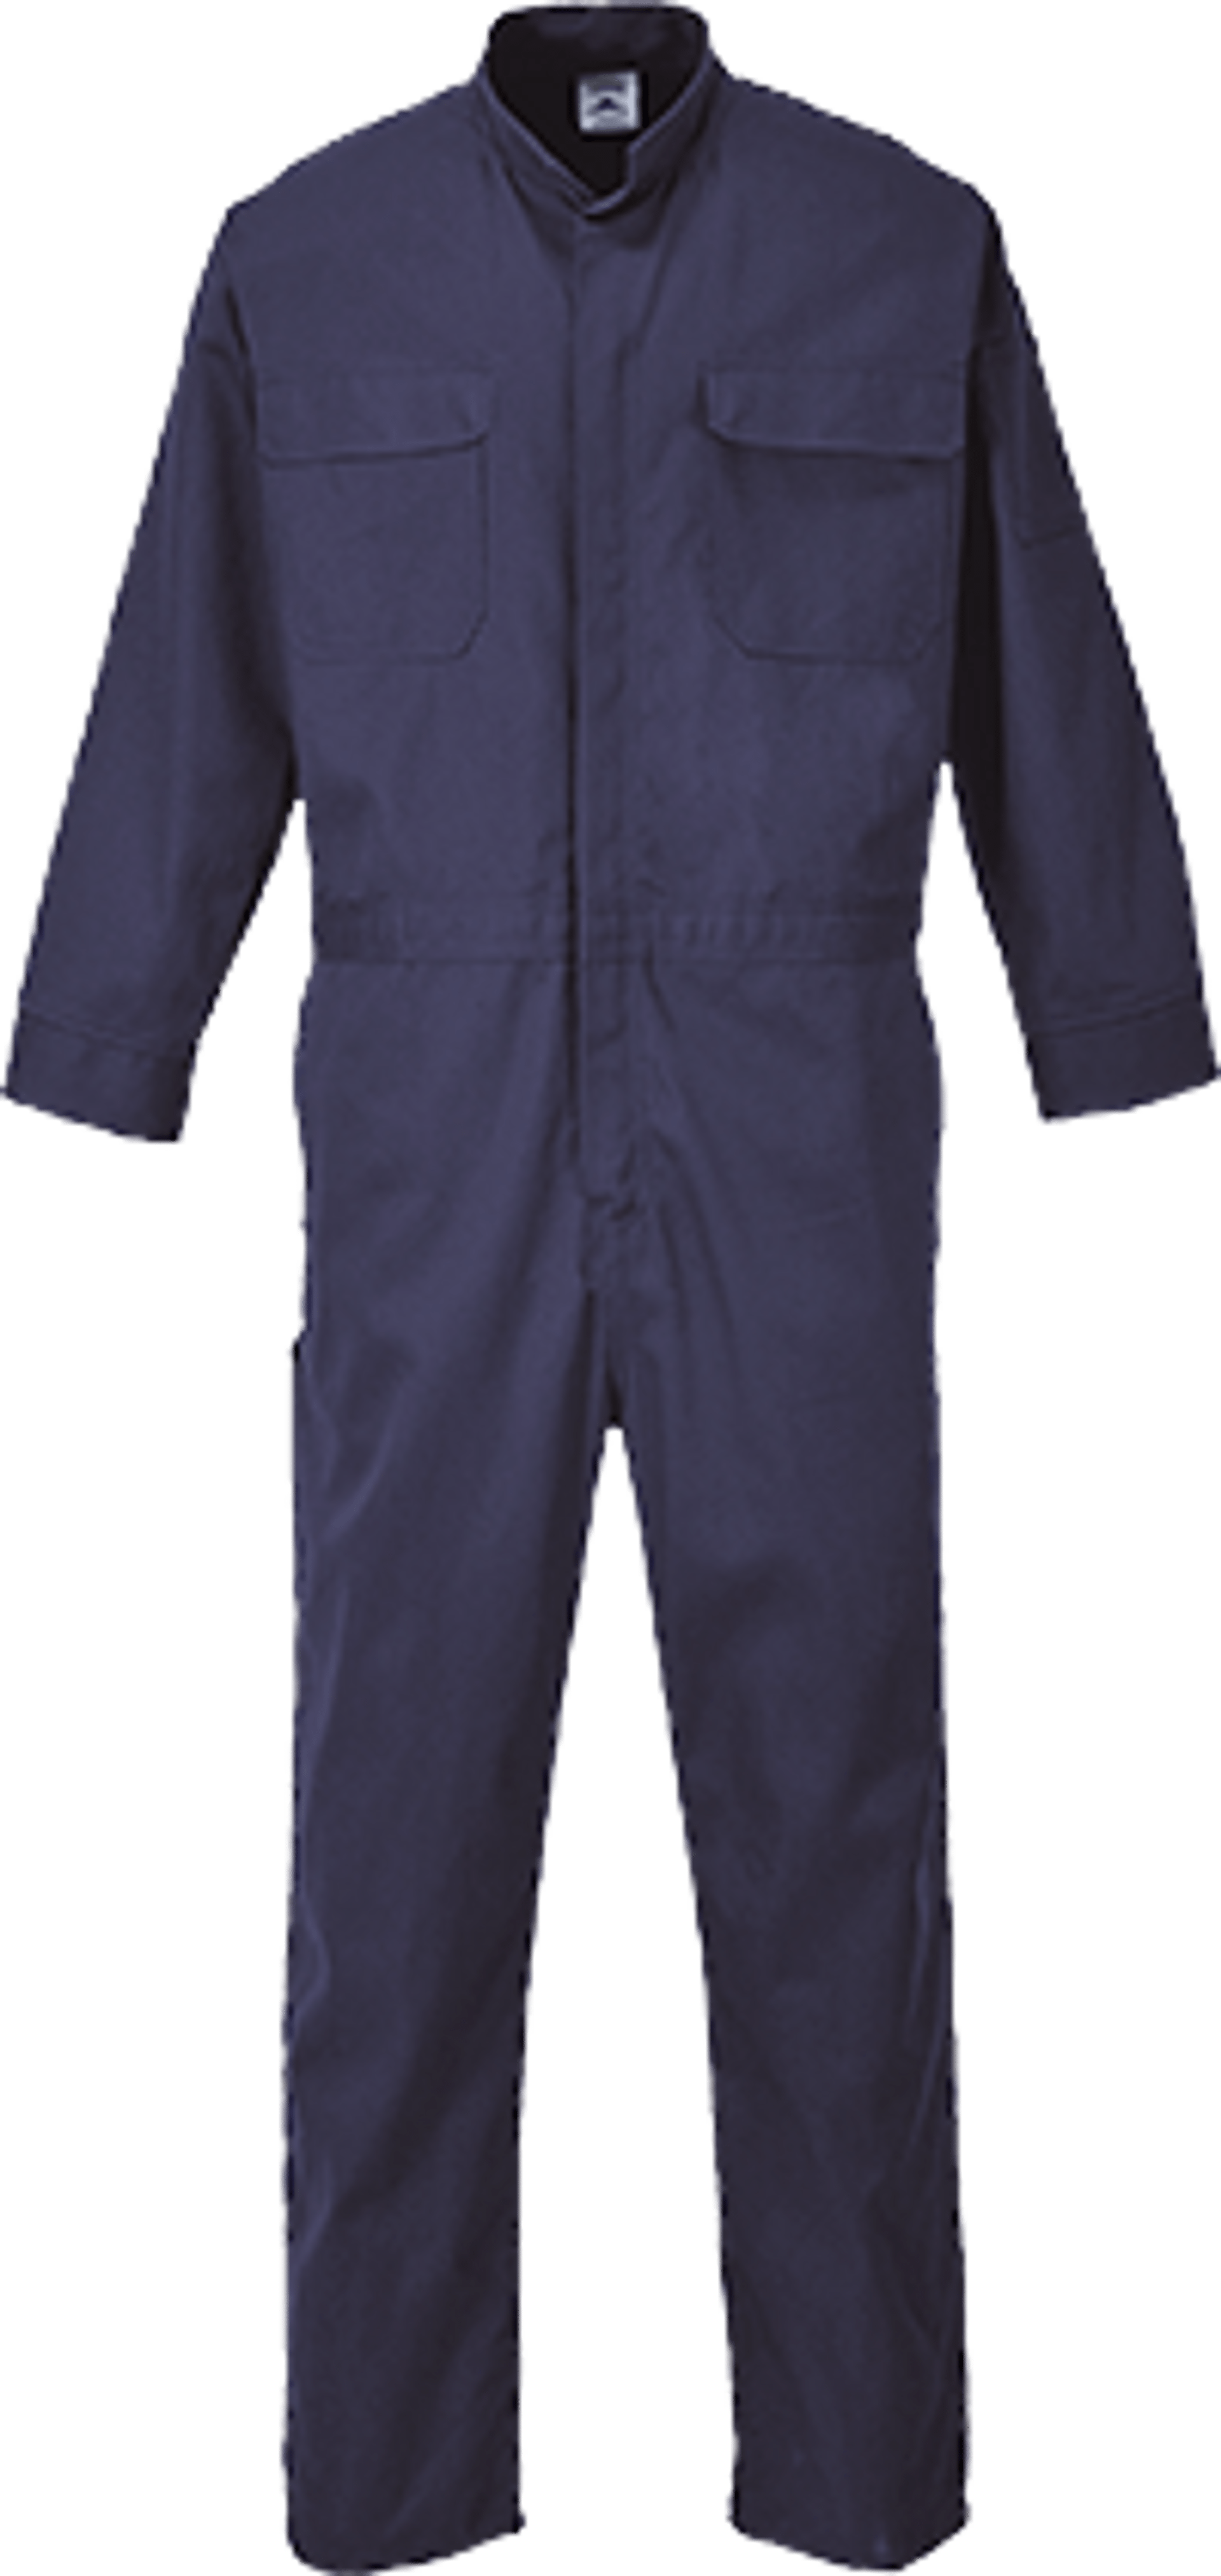 Portwest Bizflame 88/12 Flame Resistant Coverall